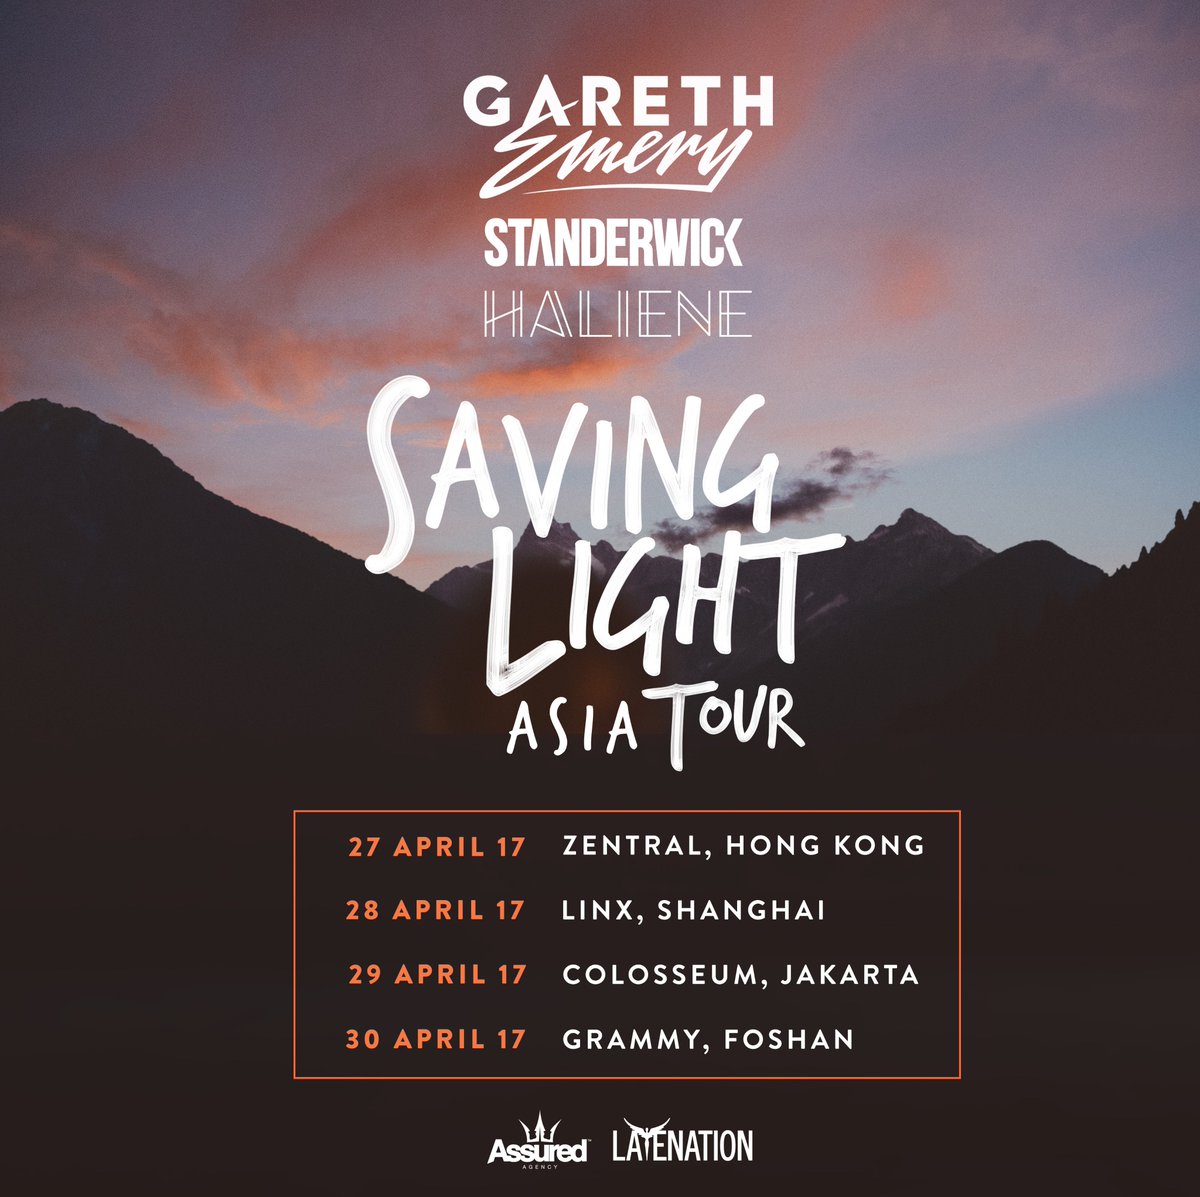 SAVING LIGHT 🌏 ASIA TOUR  This is going to be awesome. 🎉🙌🎶  — Team GE https://t.co/pqa50801cW